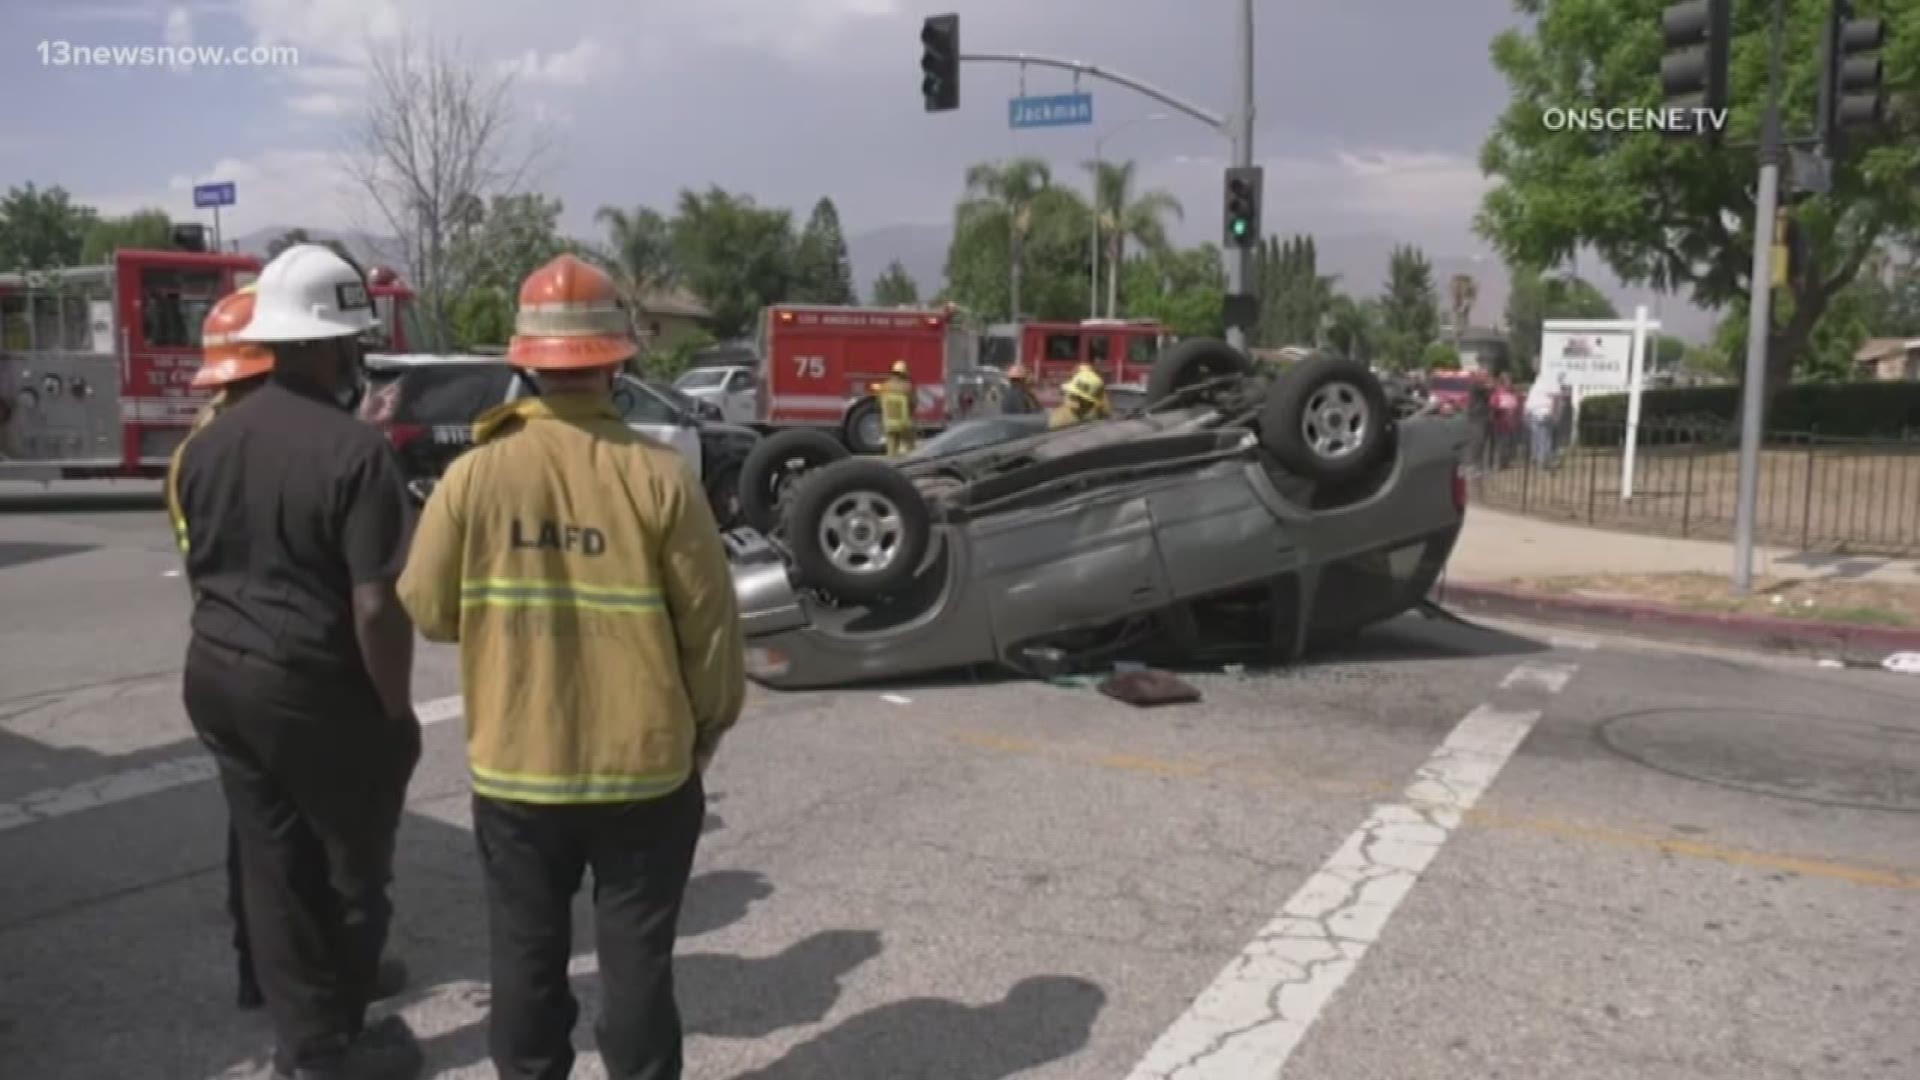 The actor played a hero in real life when he helped rescue a baby from a flipped car after a crash in Los Angeles.